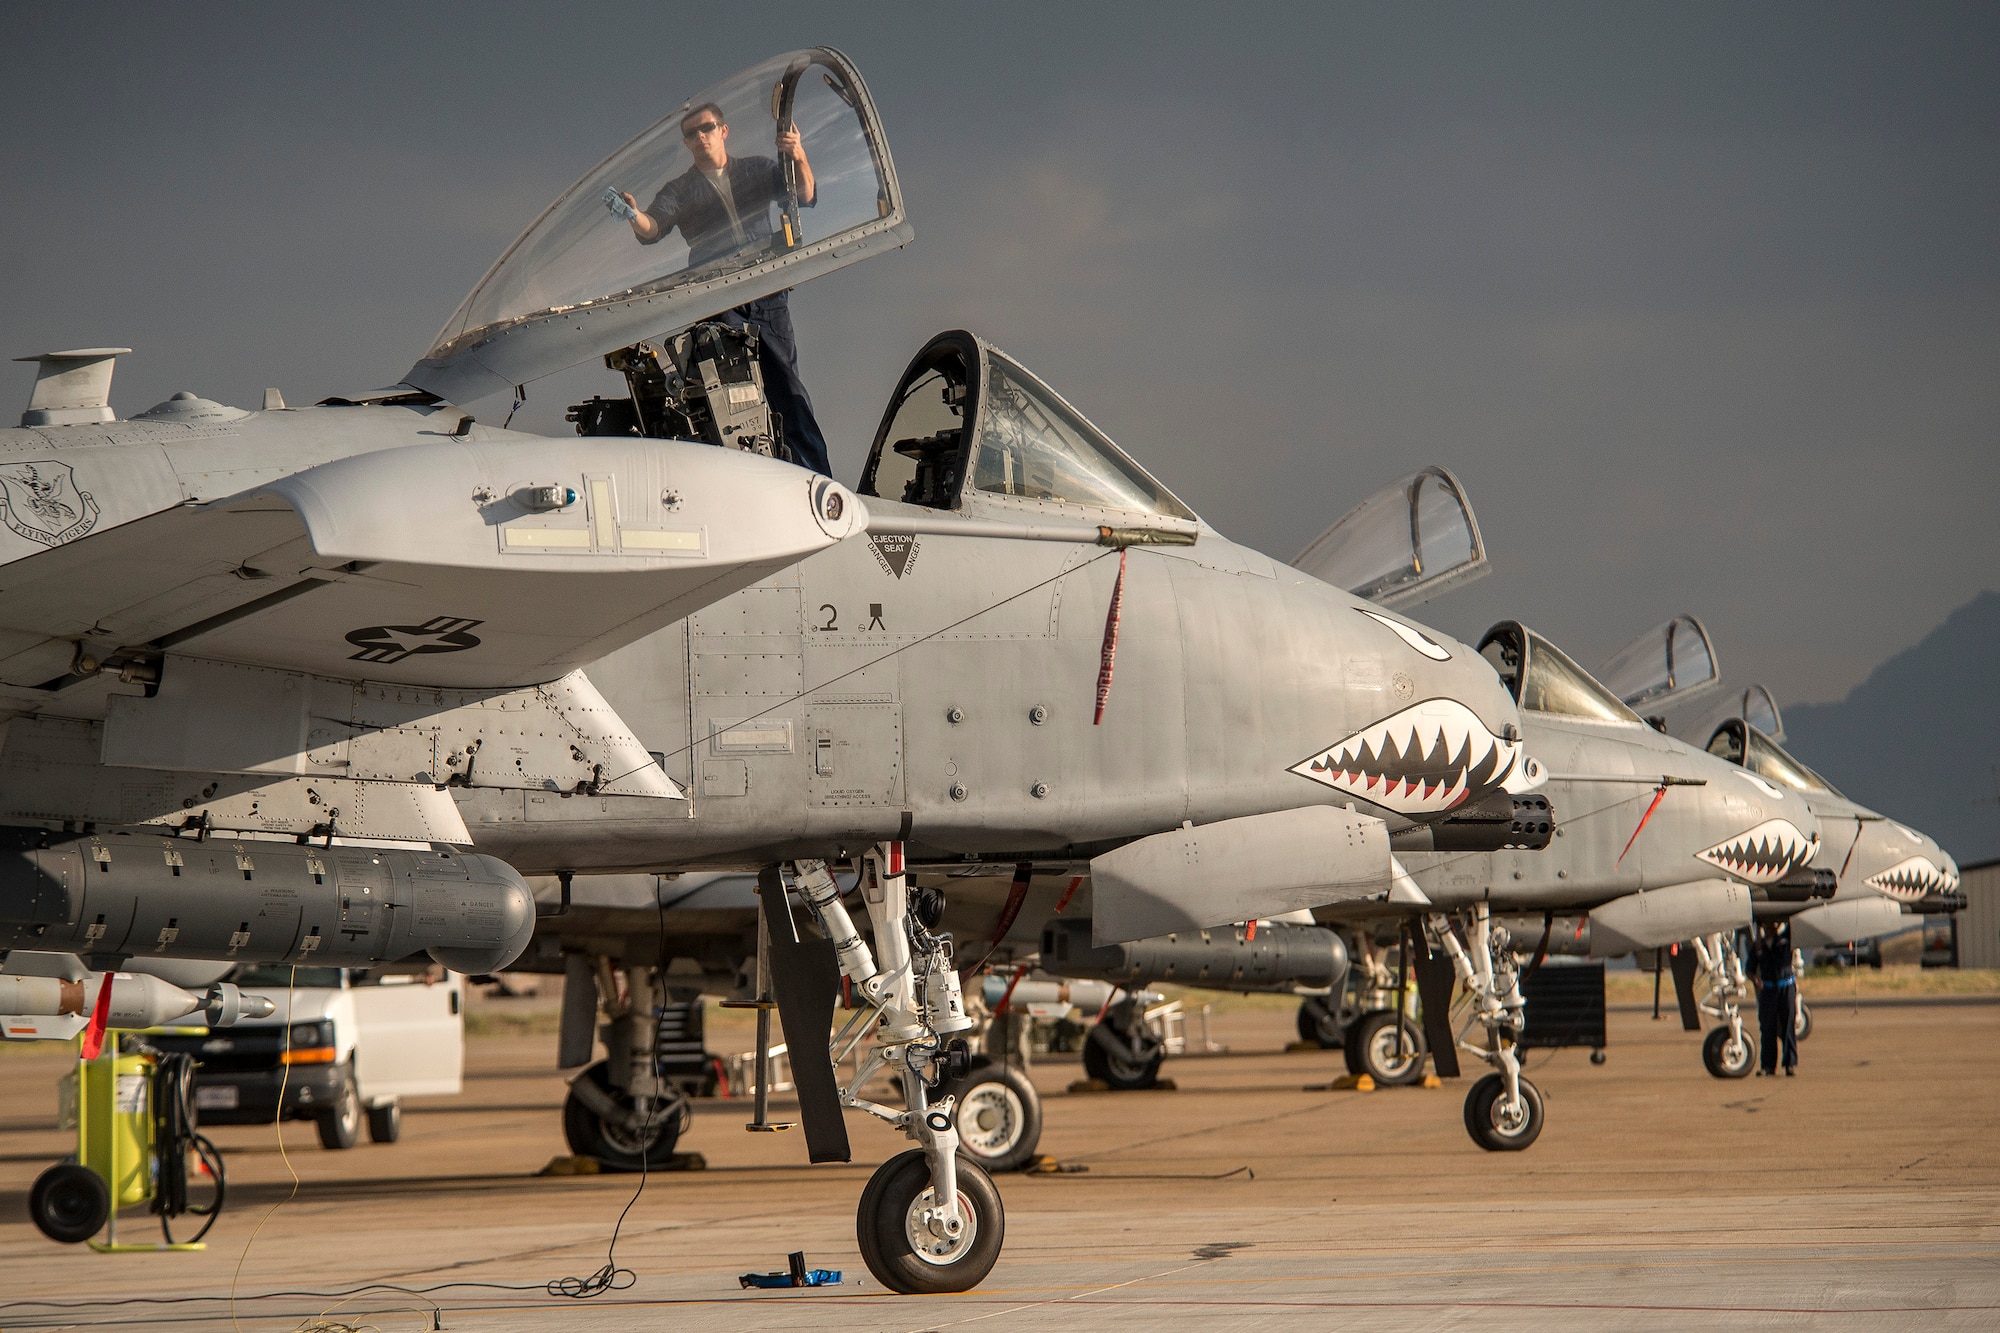 Senior Airman Sterling Vaughan, 23rd Aircraft Maintenance Squadron, Moody Air Force Base, Ga., cleans the canopy on an A-10 Thunderbolt II aircraft before flight Aug. 3 at Hill AFB. Moody Airmen and aircraft were at Hill participating in a combat exercise known as Combat Hammer. (U.S. Air Force photo by Paul Holcomb)